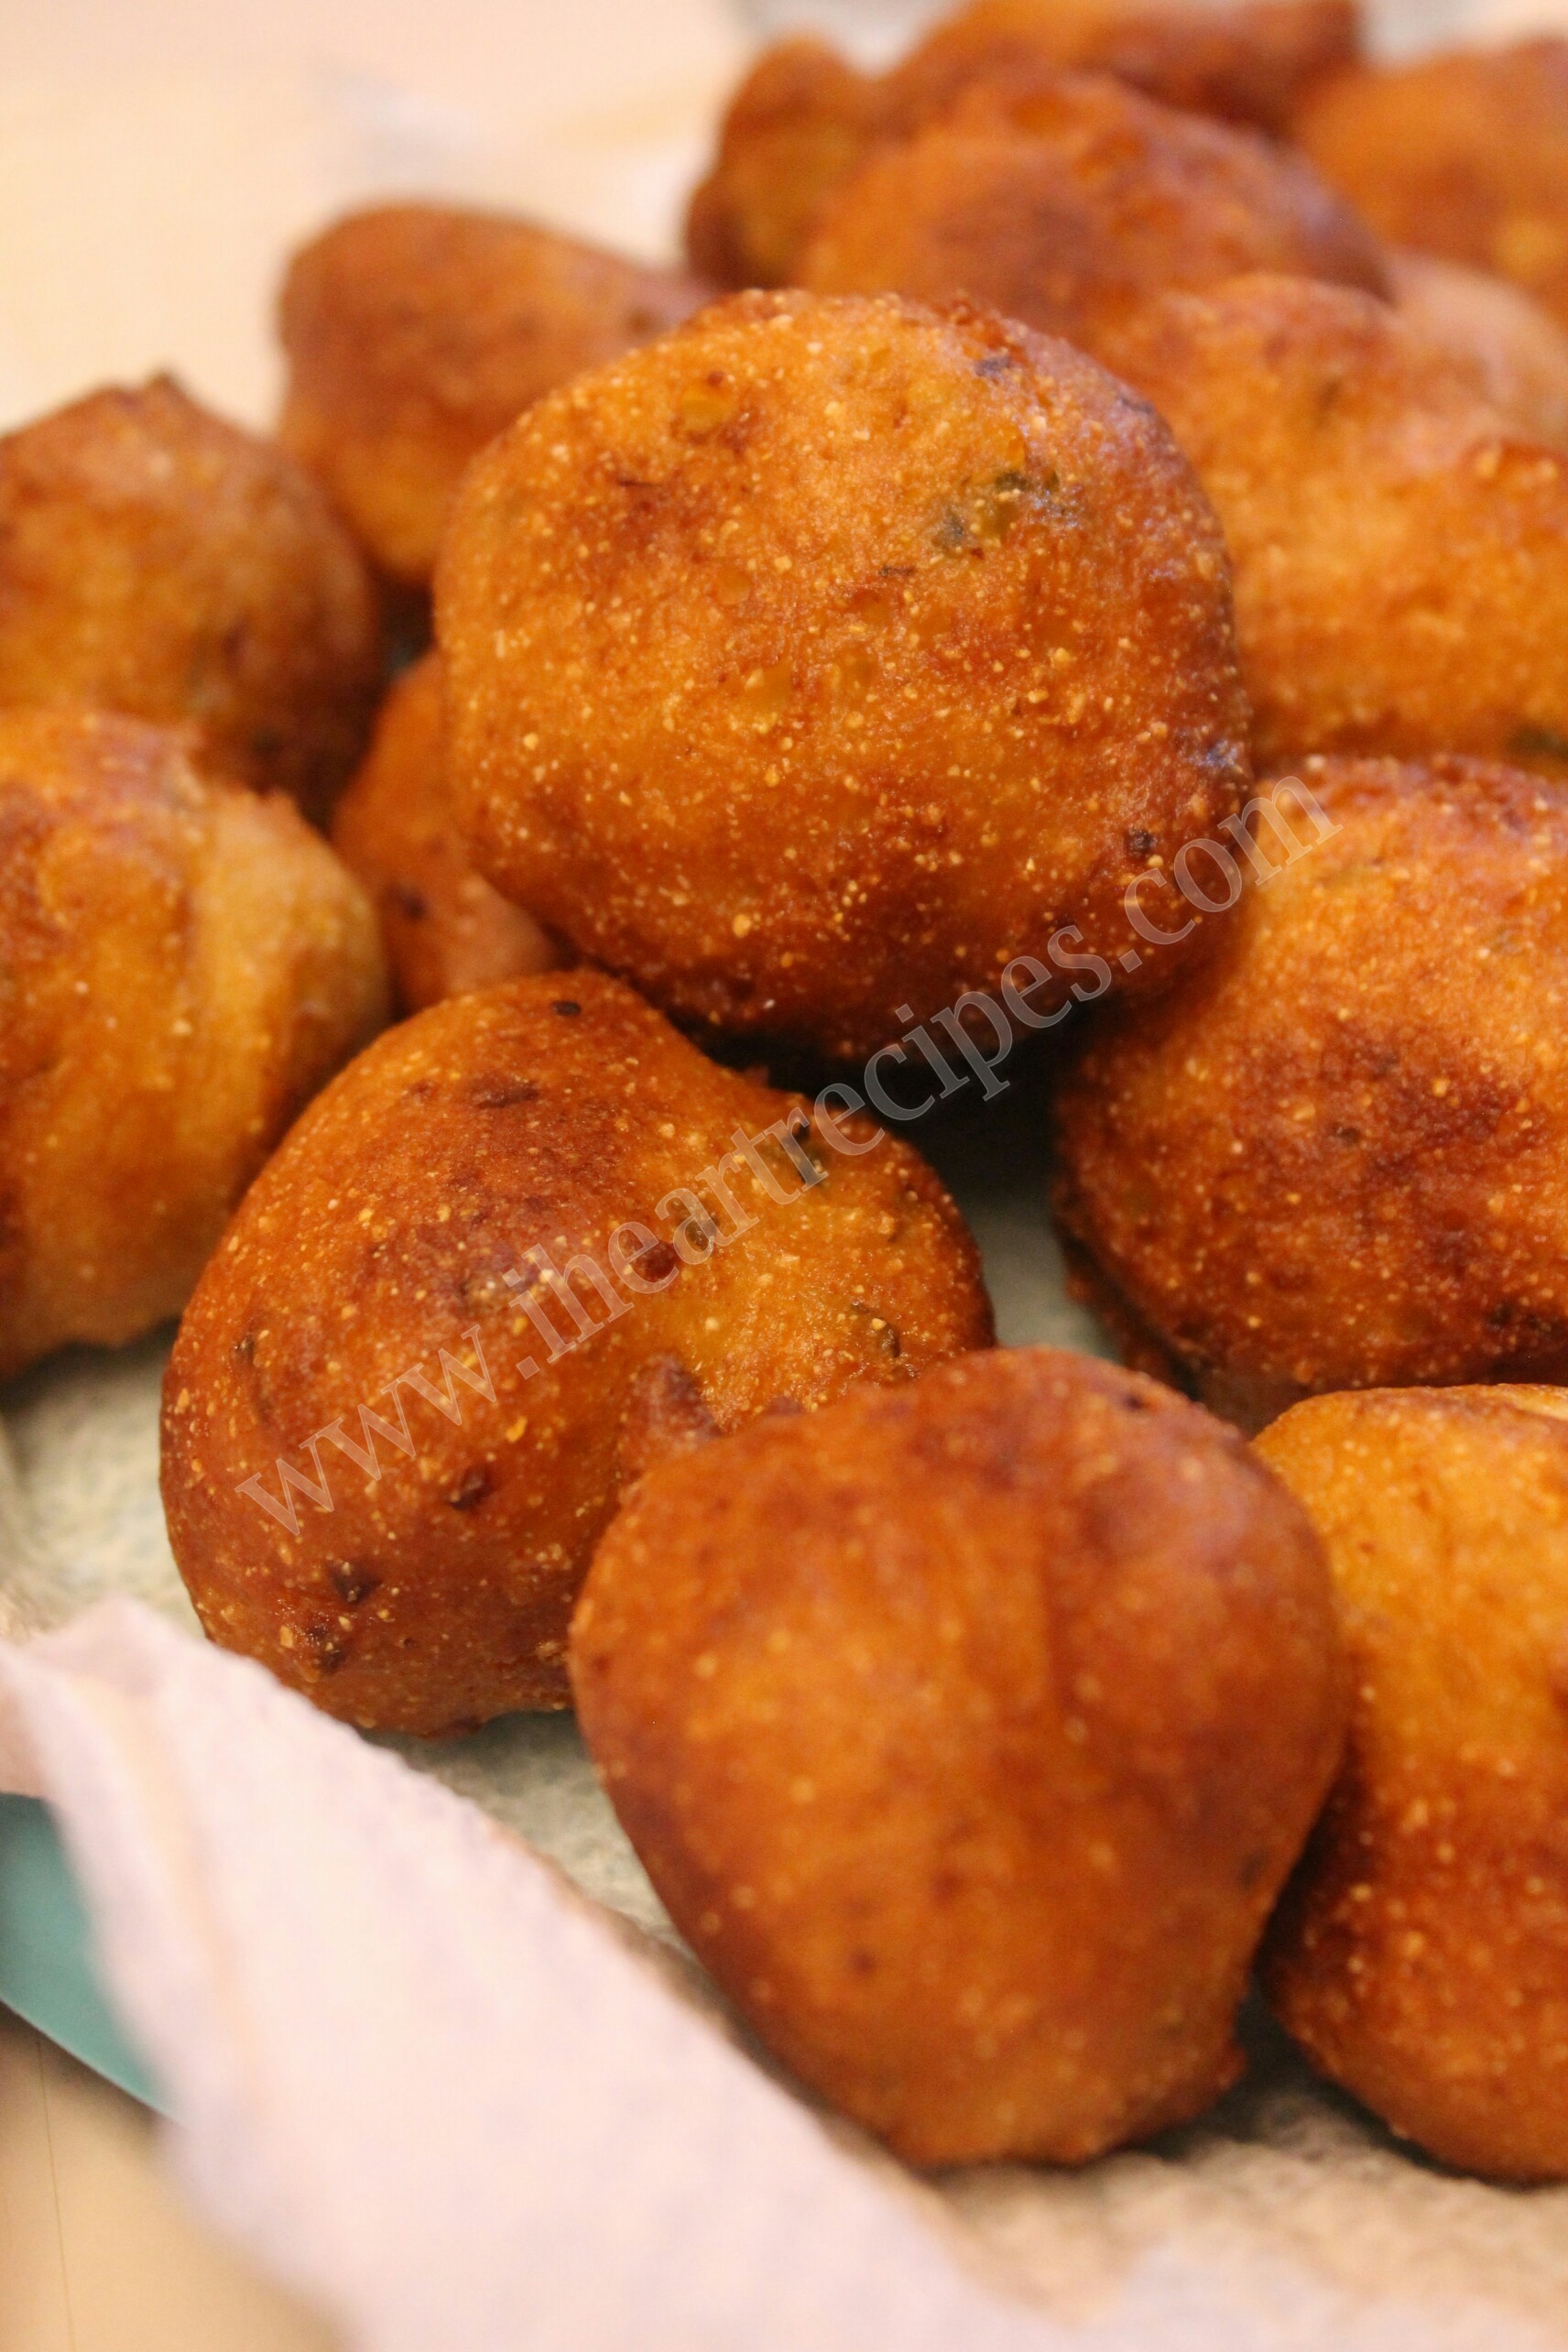 Freshly fried Southern hush puppies rest on a paper towel. The exterior is a crisp golden brown, with small specs of cornmeal and onions in the batter.